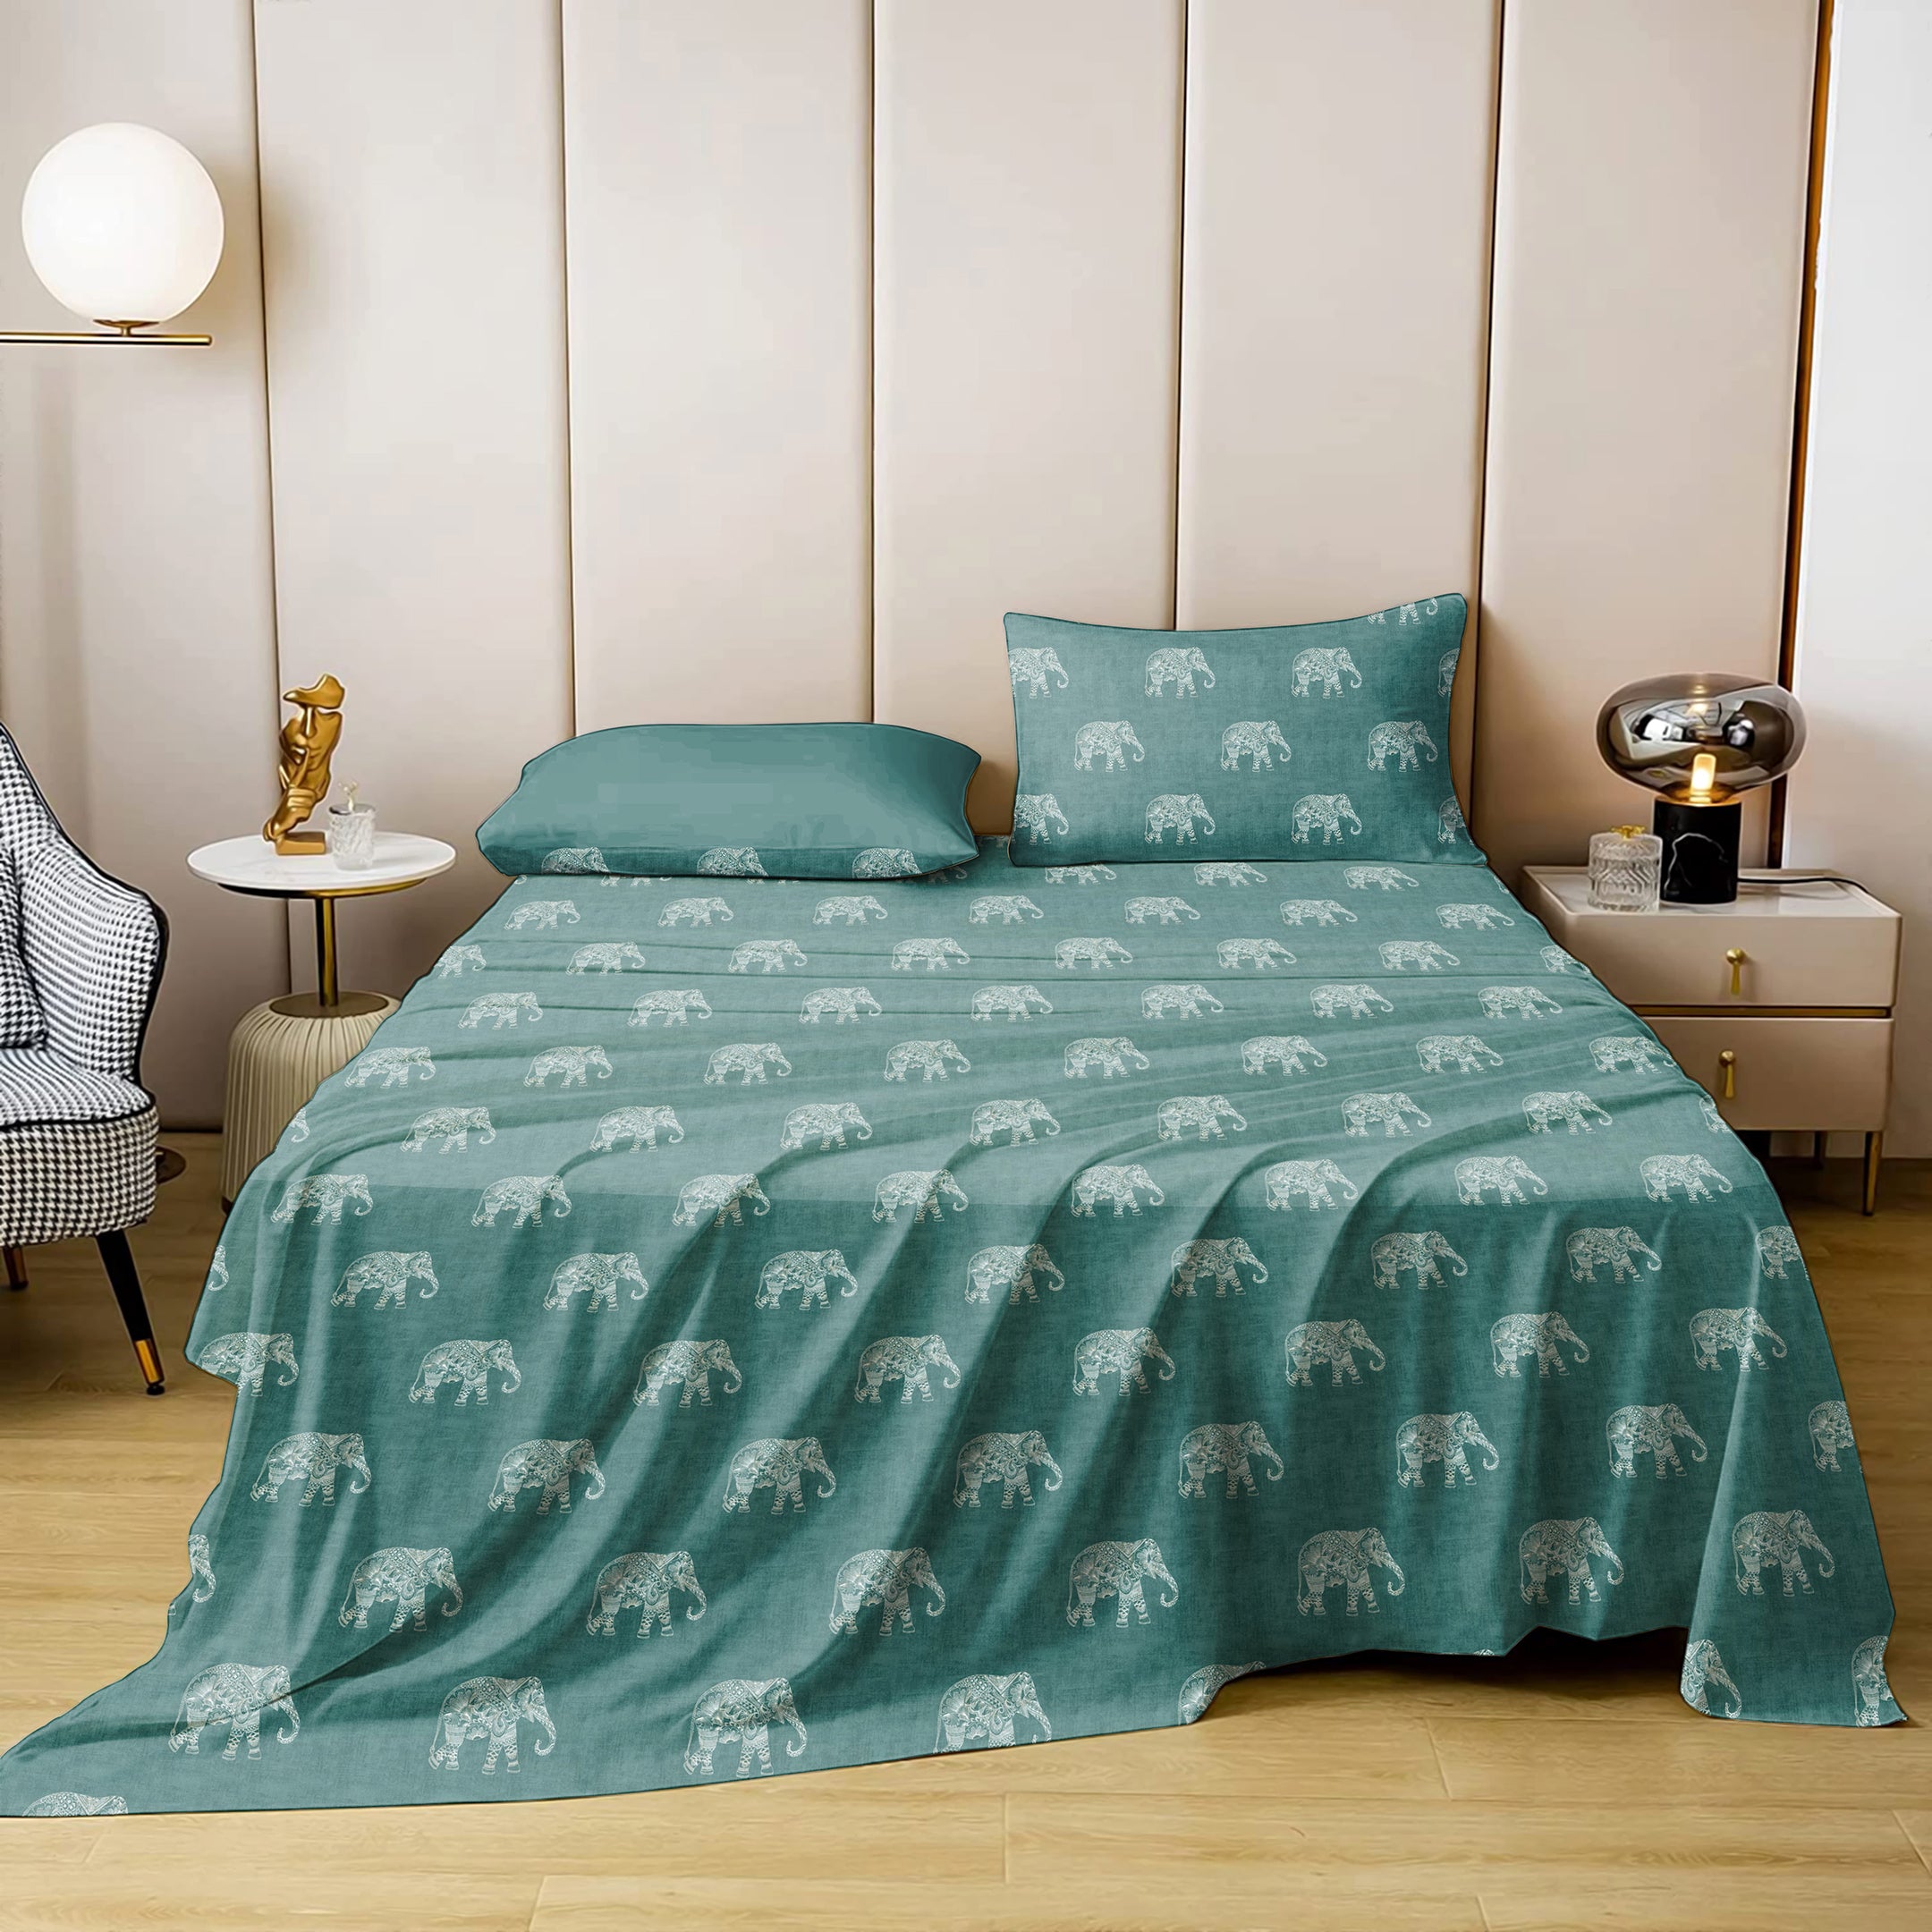 Jodhpur Elephant Bedsheet for Double Bed with 2 PillowCovers King Size (104" X 90") Teal